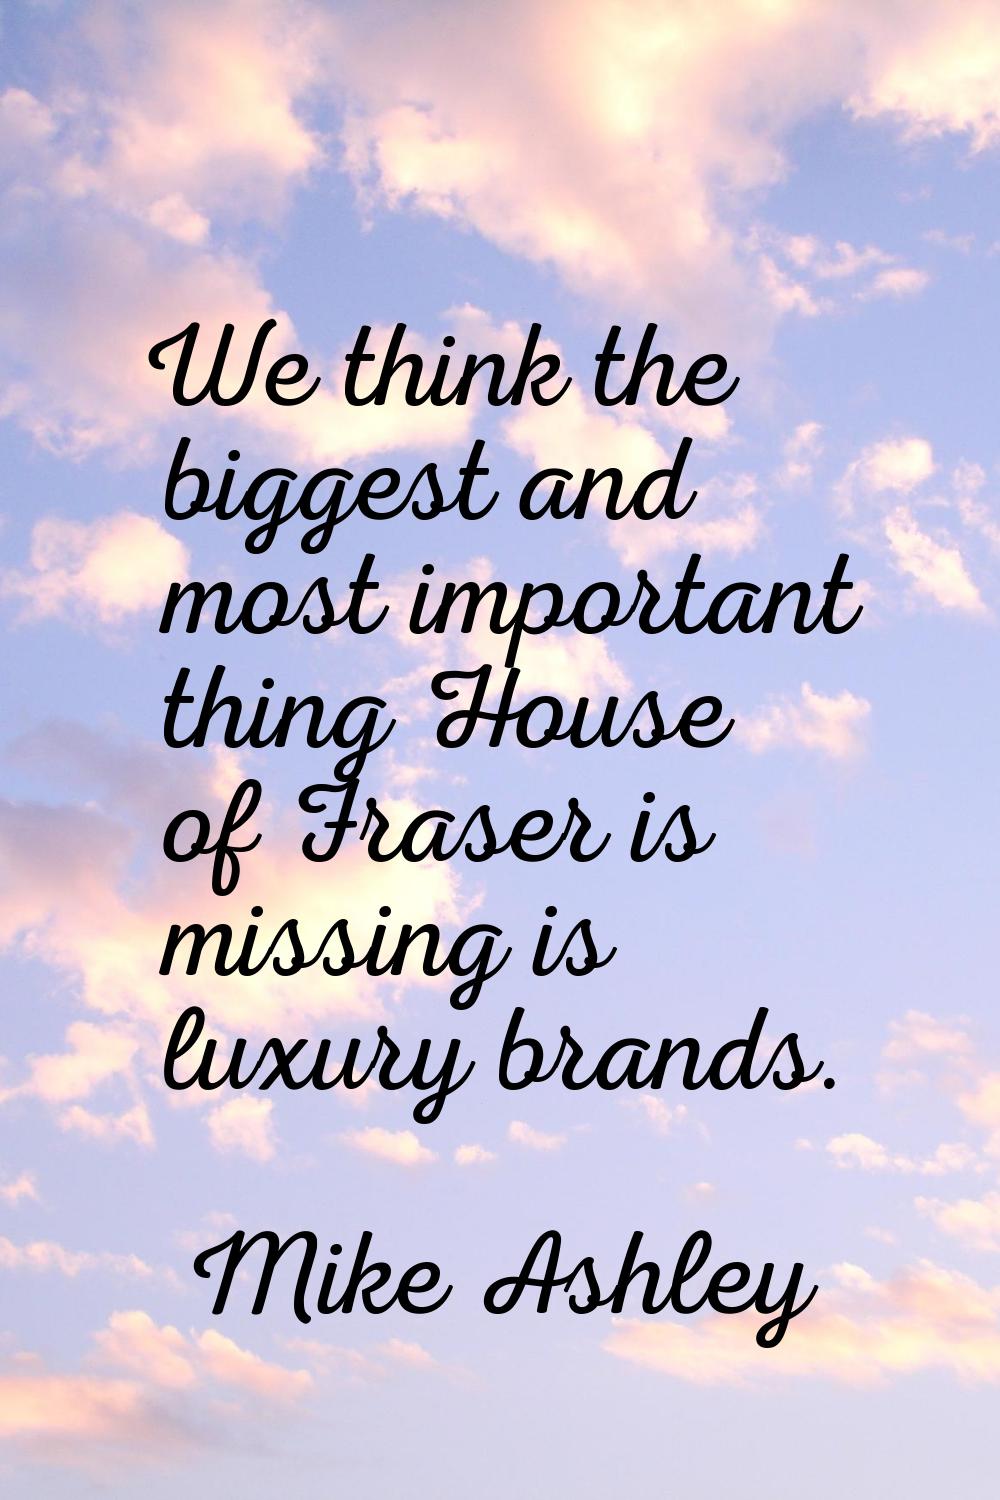 We think the biggest and most important thing House of Fraser is missing is luxury brands.